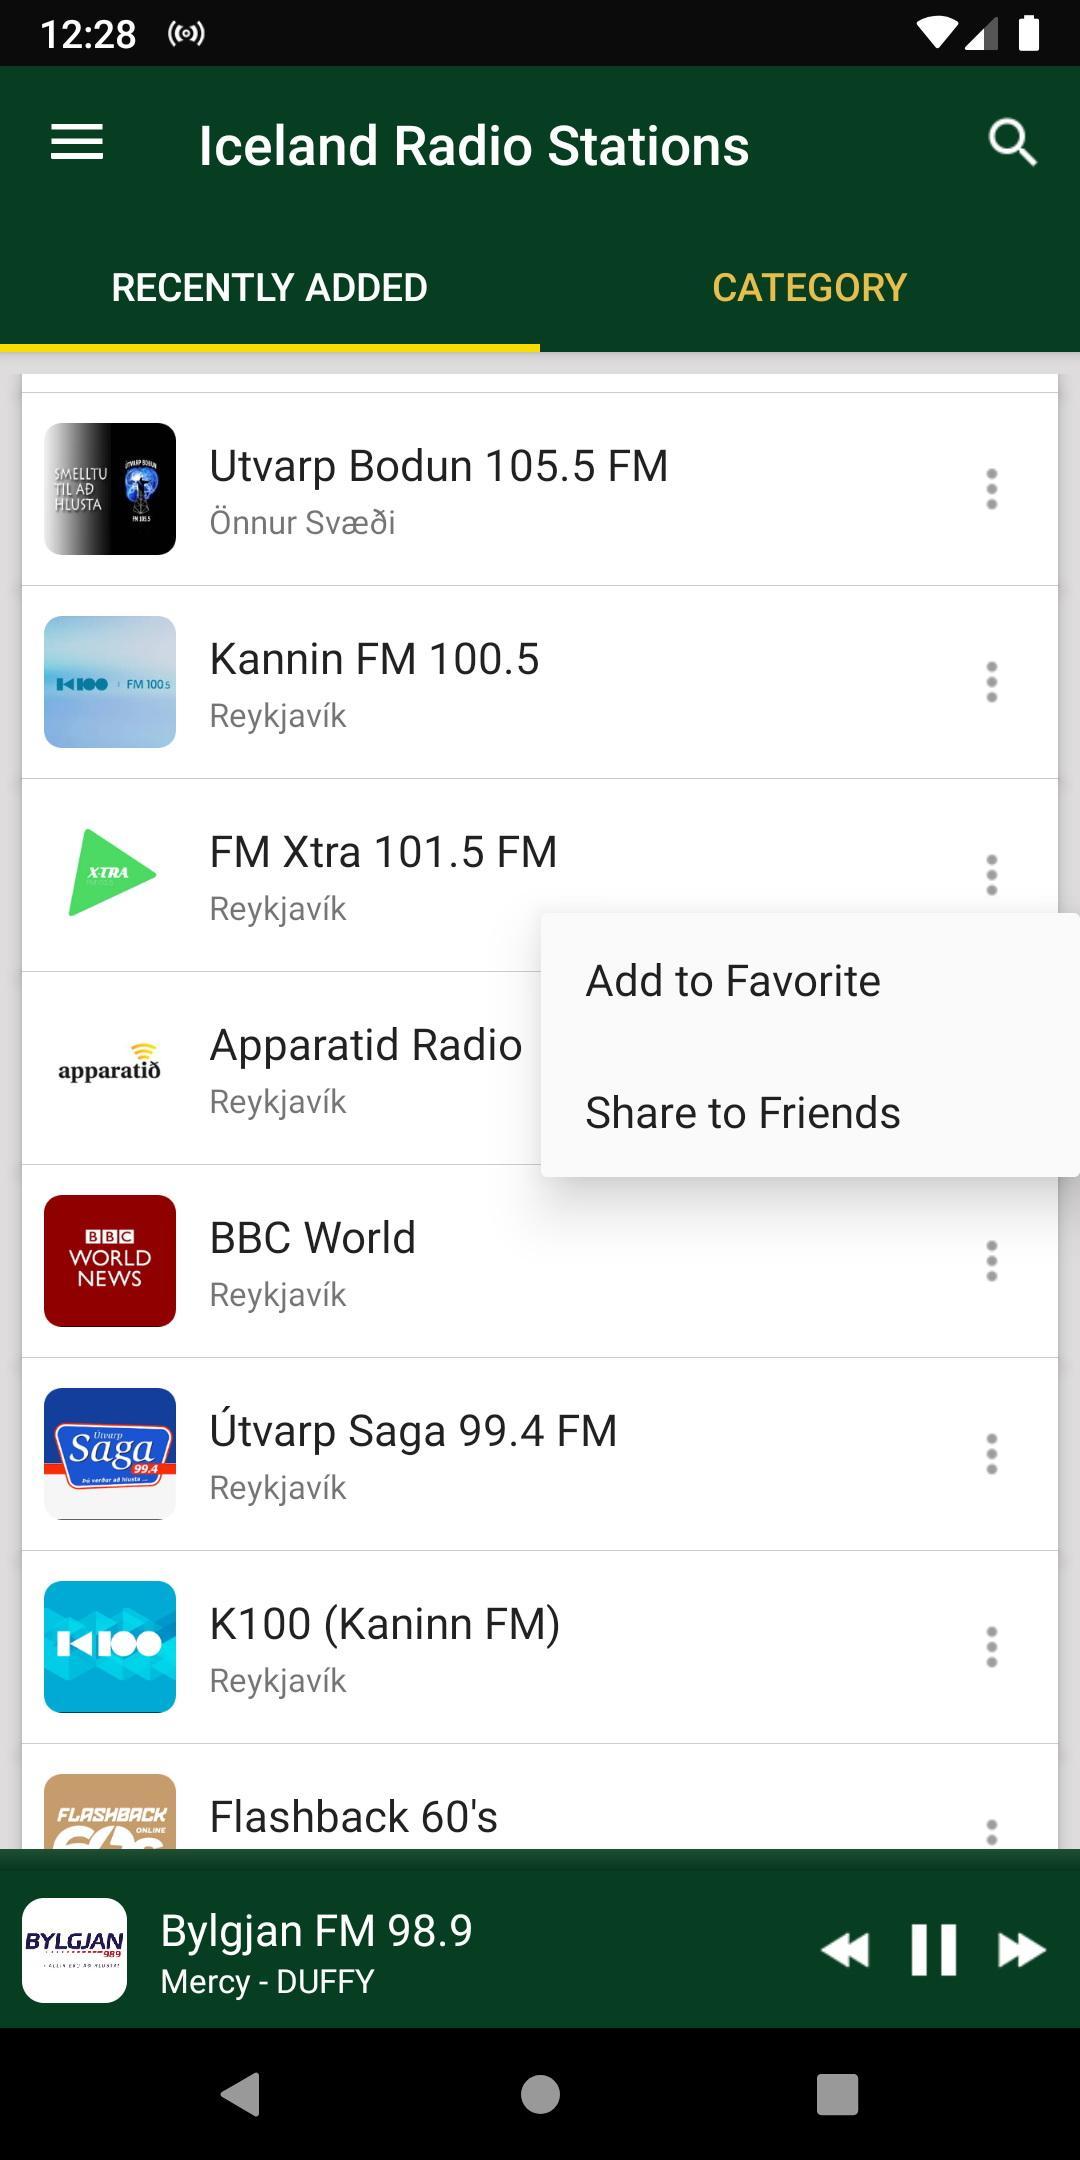 Iceland Radio Stations for Android - APK Download